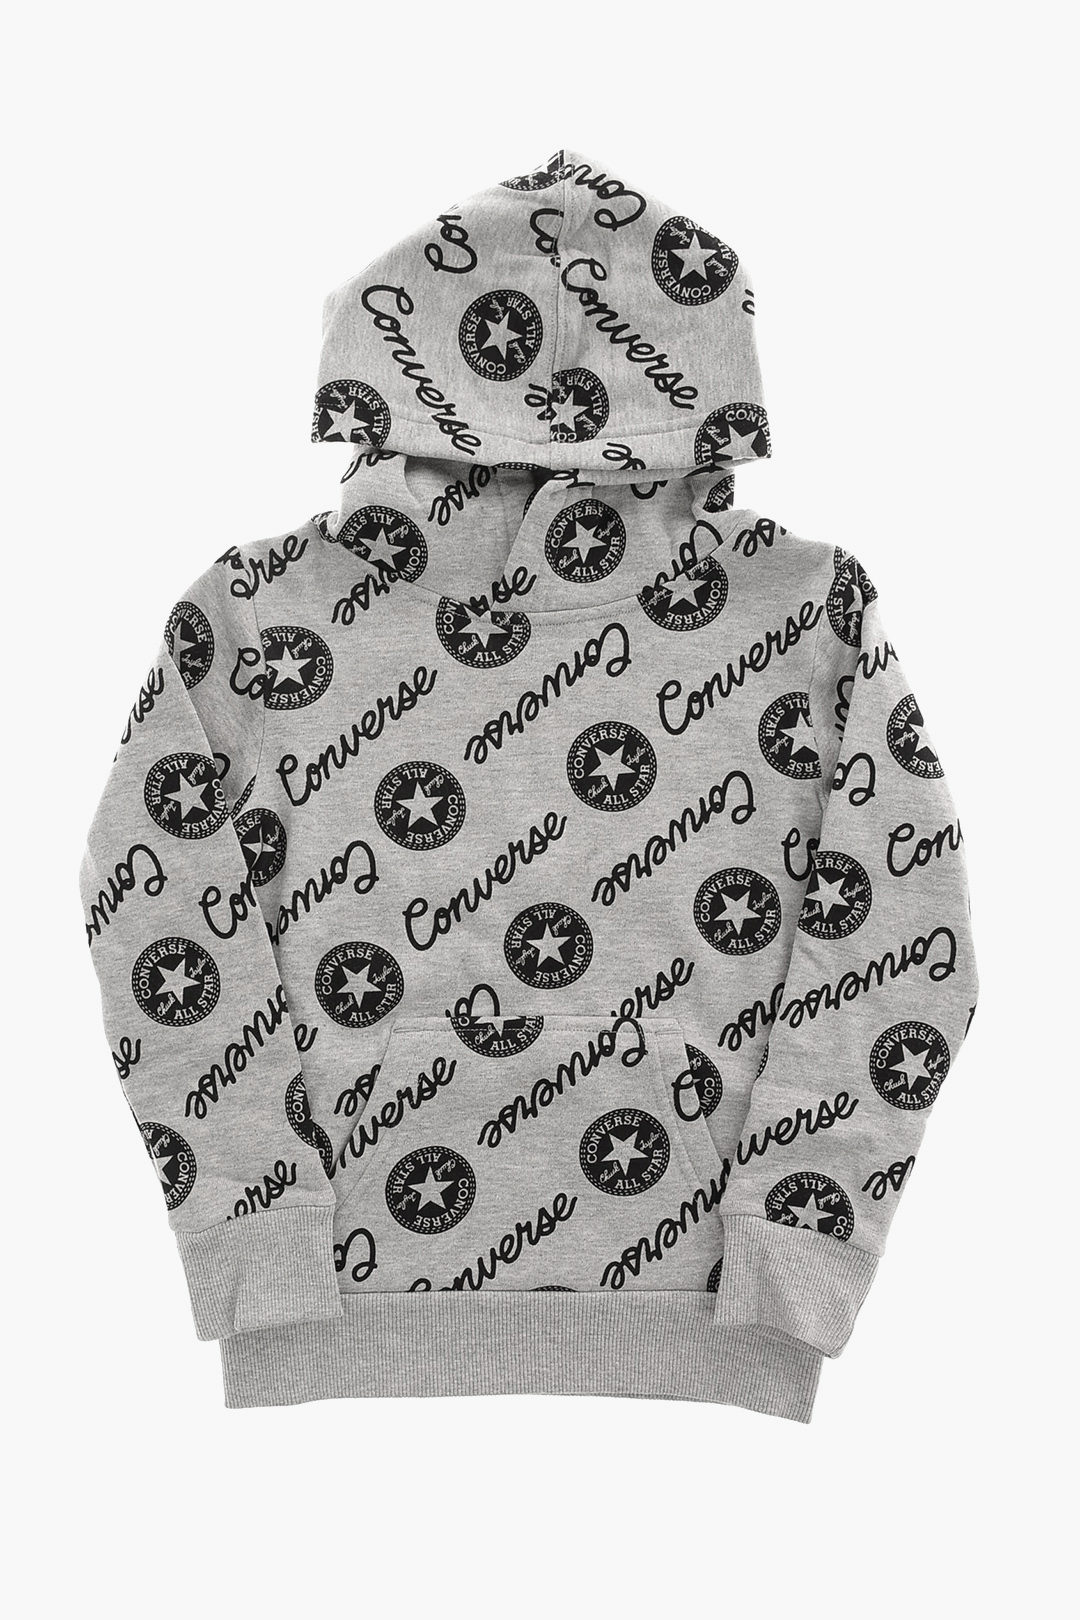 Converse KIDS ALL boys Glamood Hood Outlet All Over with STAR Logo Sweatshirt 